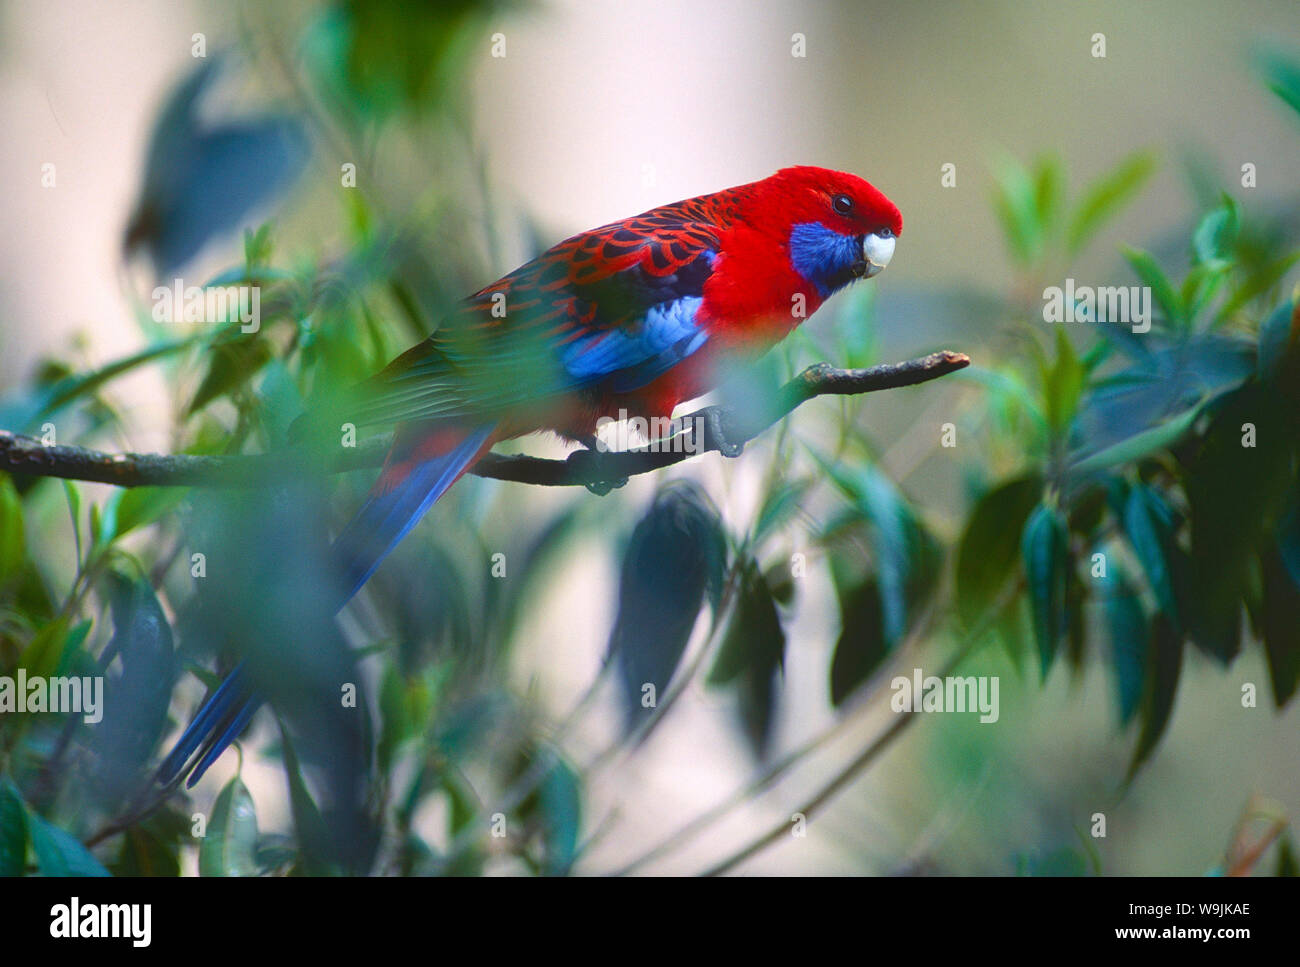 Rosella Sittich High Resolution Stock Photography and Images - Alamy